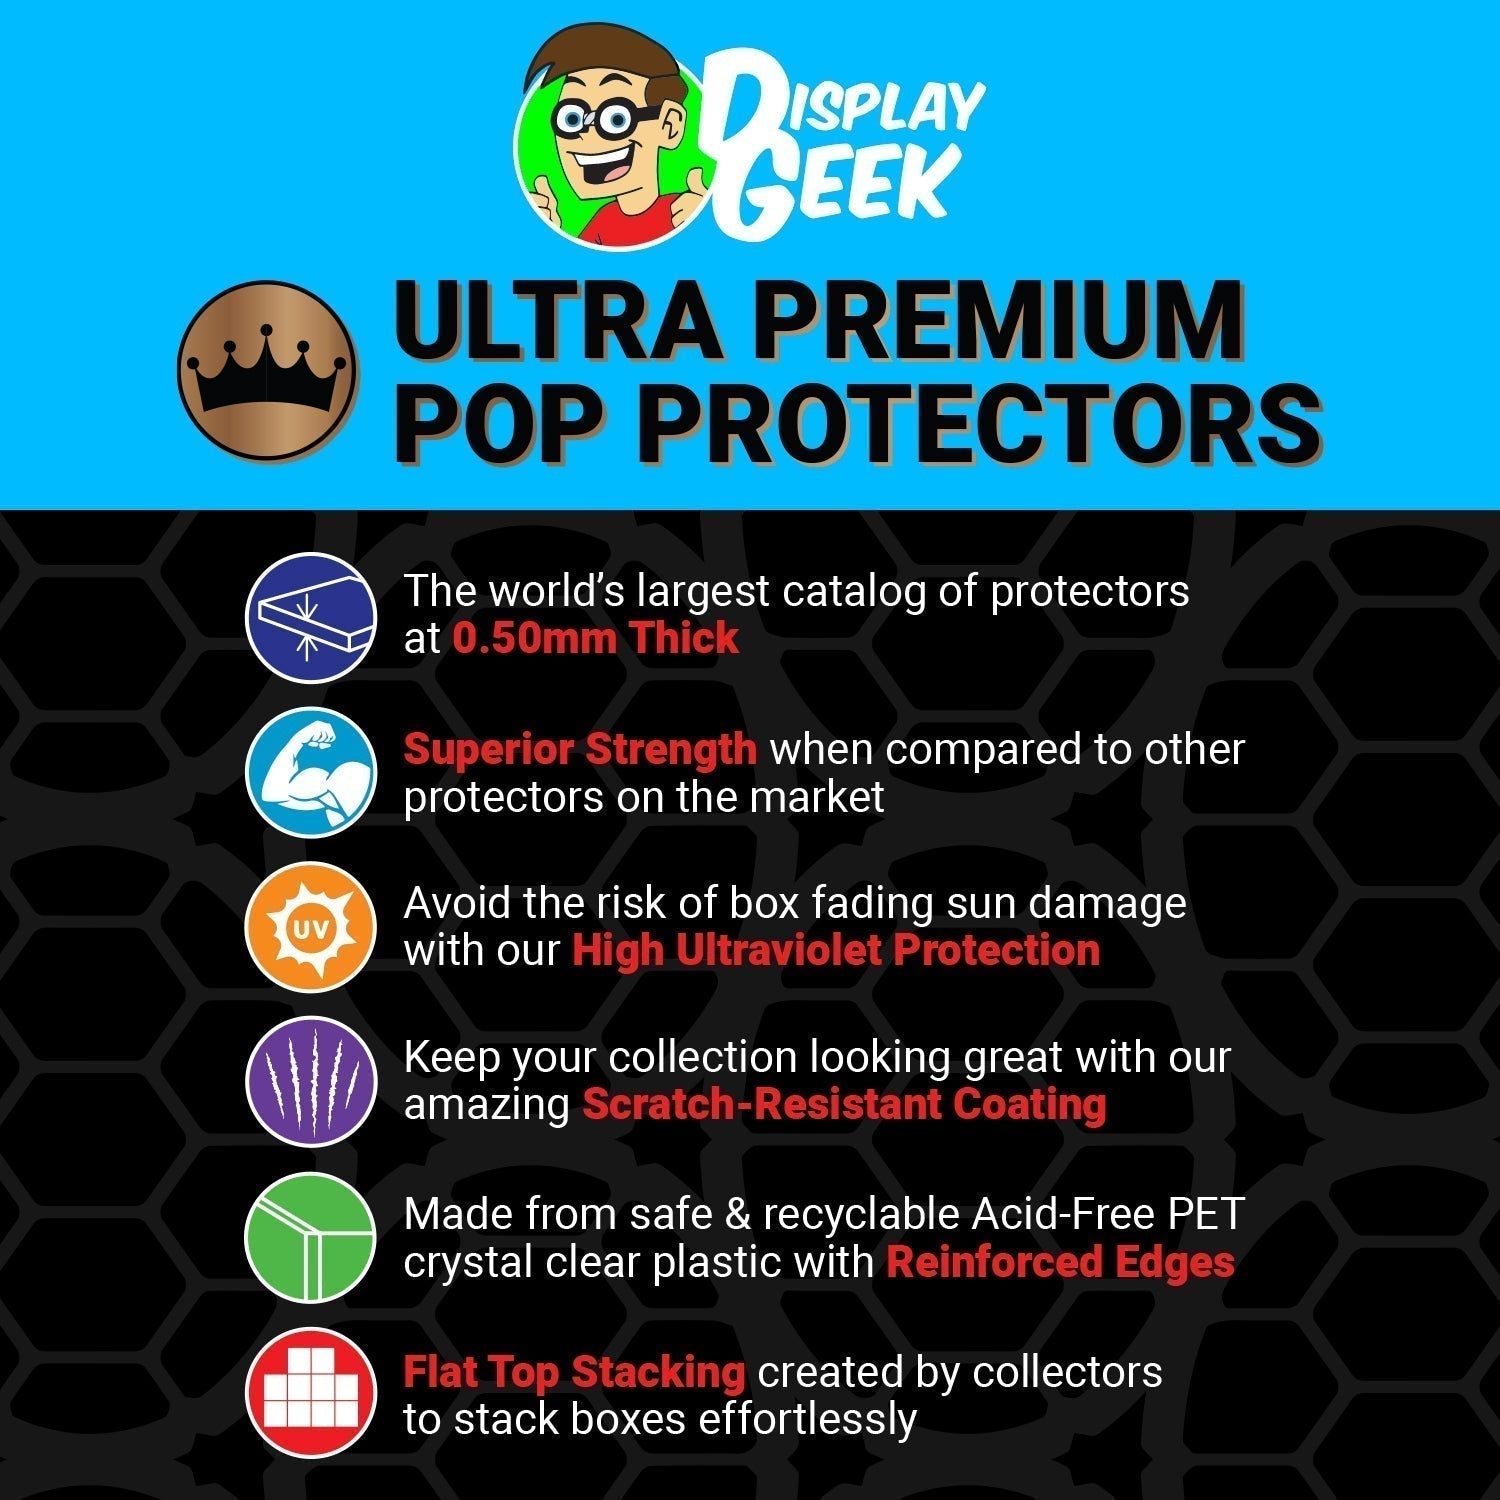 Pop Protector for 2 Pack Balloon Freddy & Balloon Bonnie Metallic Funko Pop - PPG Pop Protector Guide Search Created by Display Geek